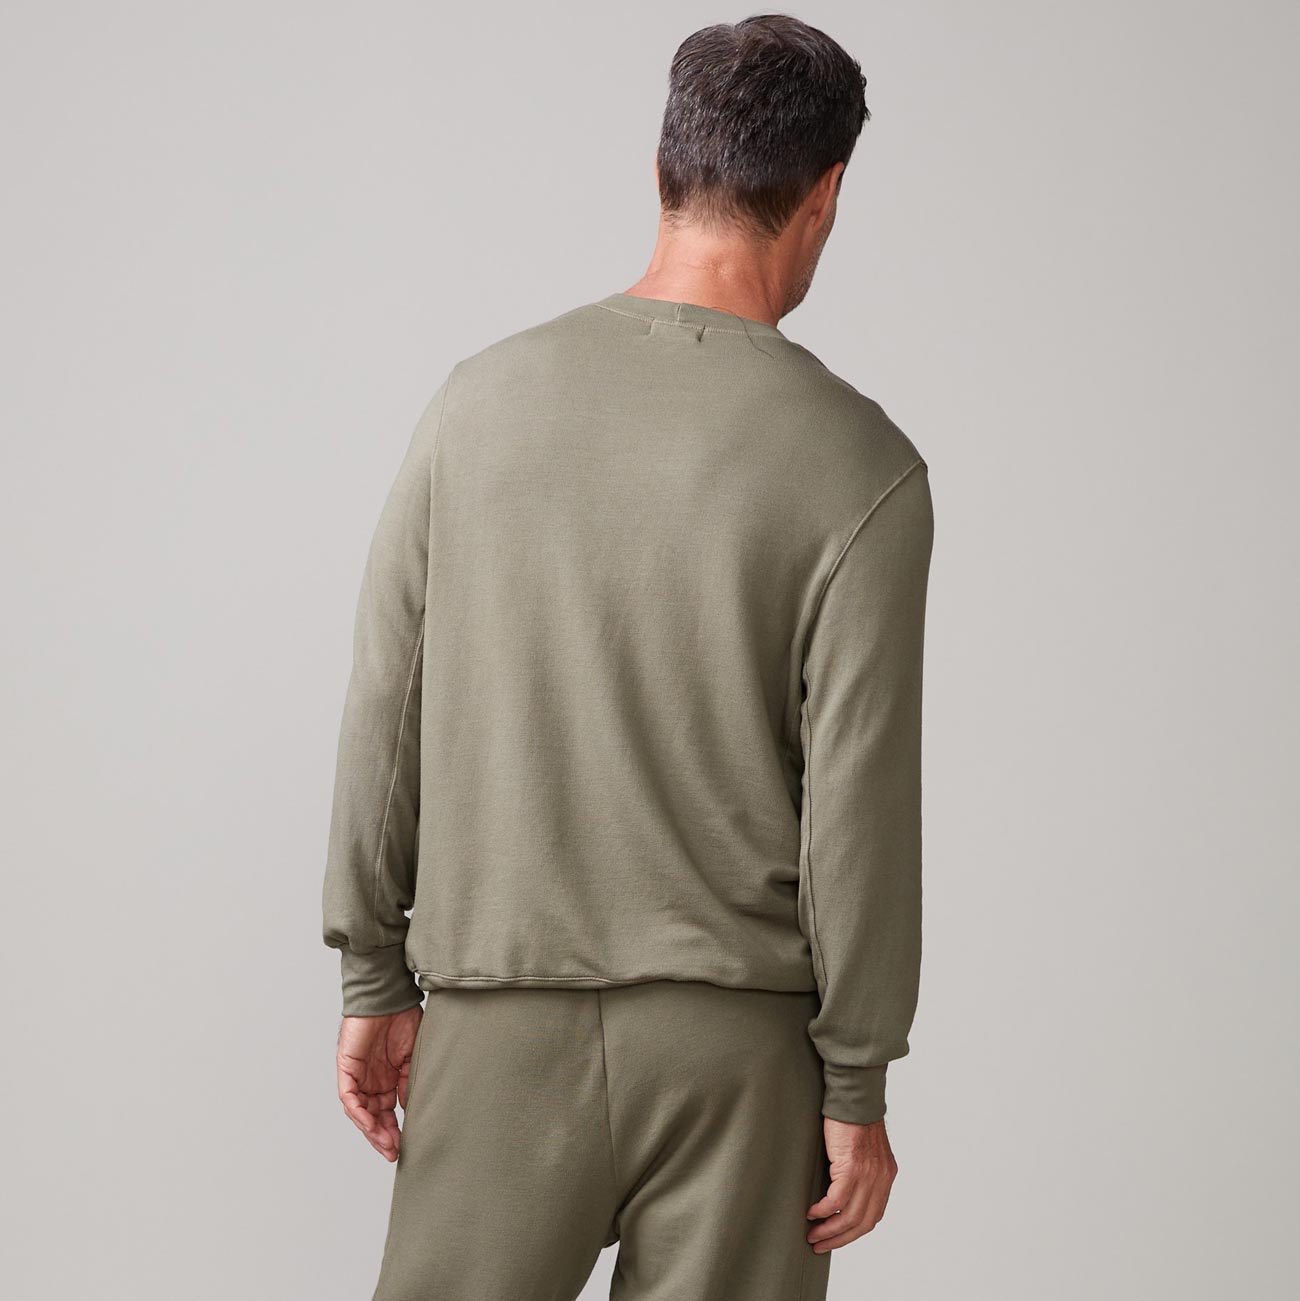 Back view of model wearing the lounge sweatshirt in army.